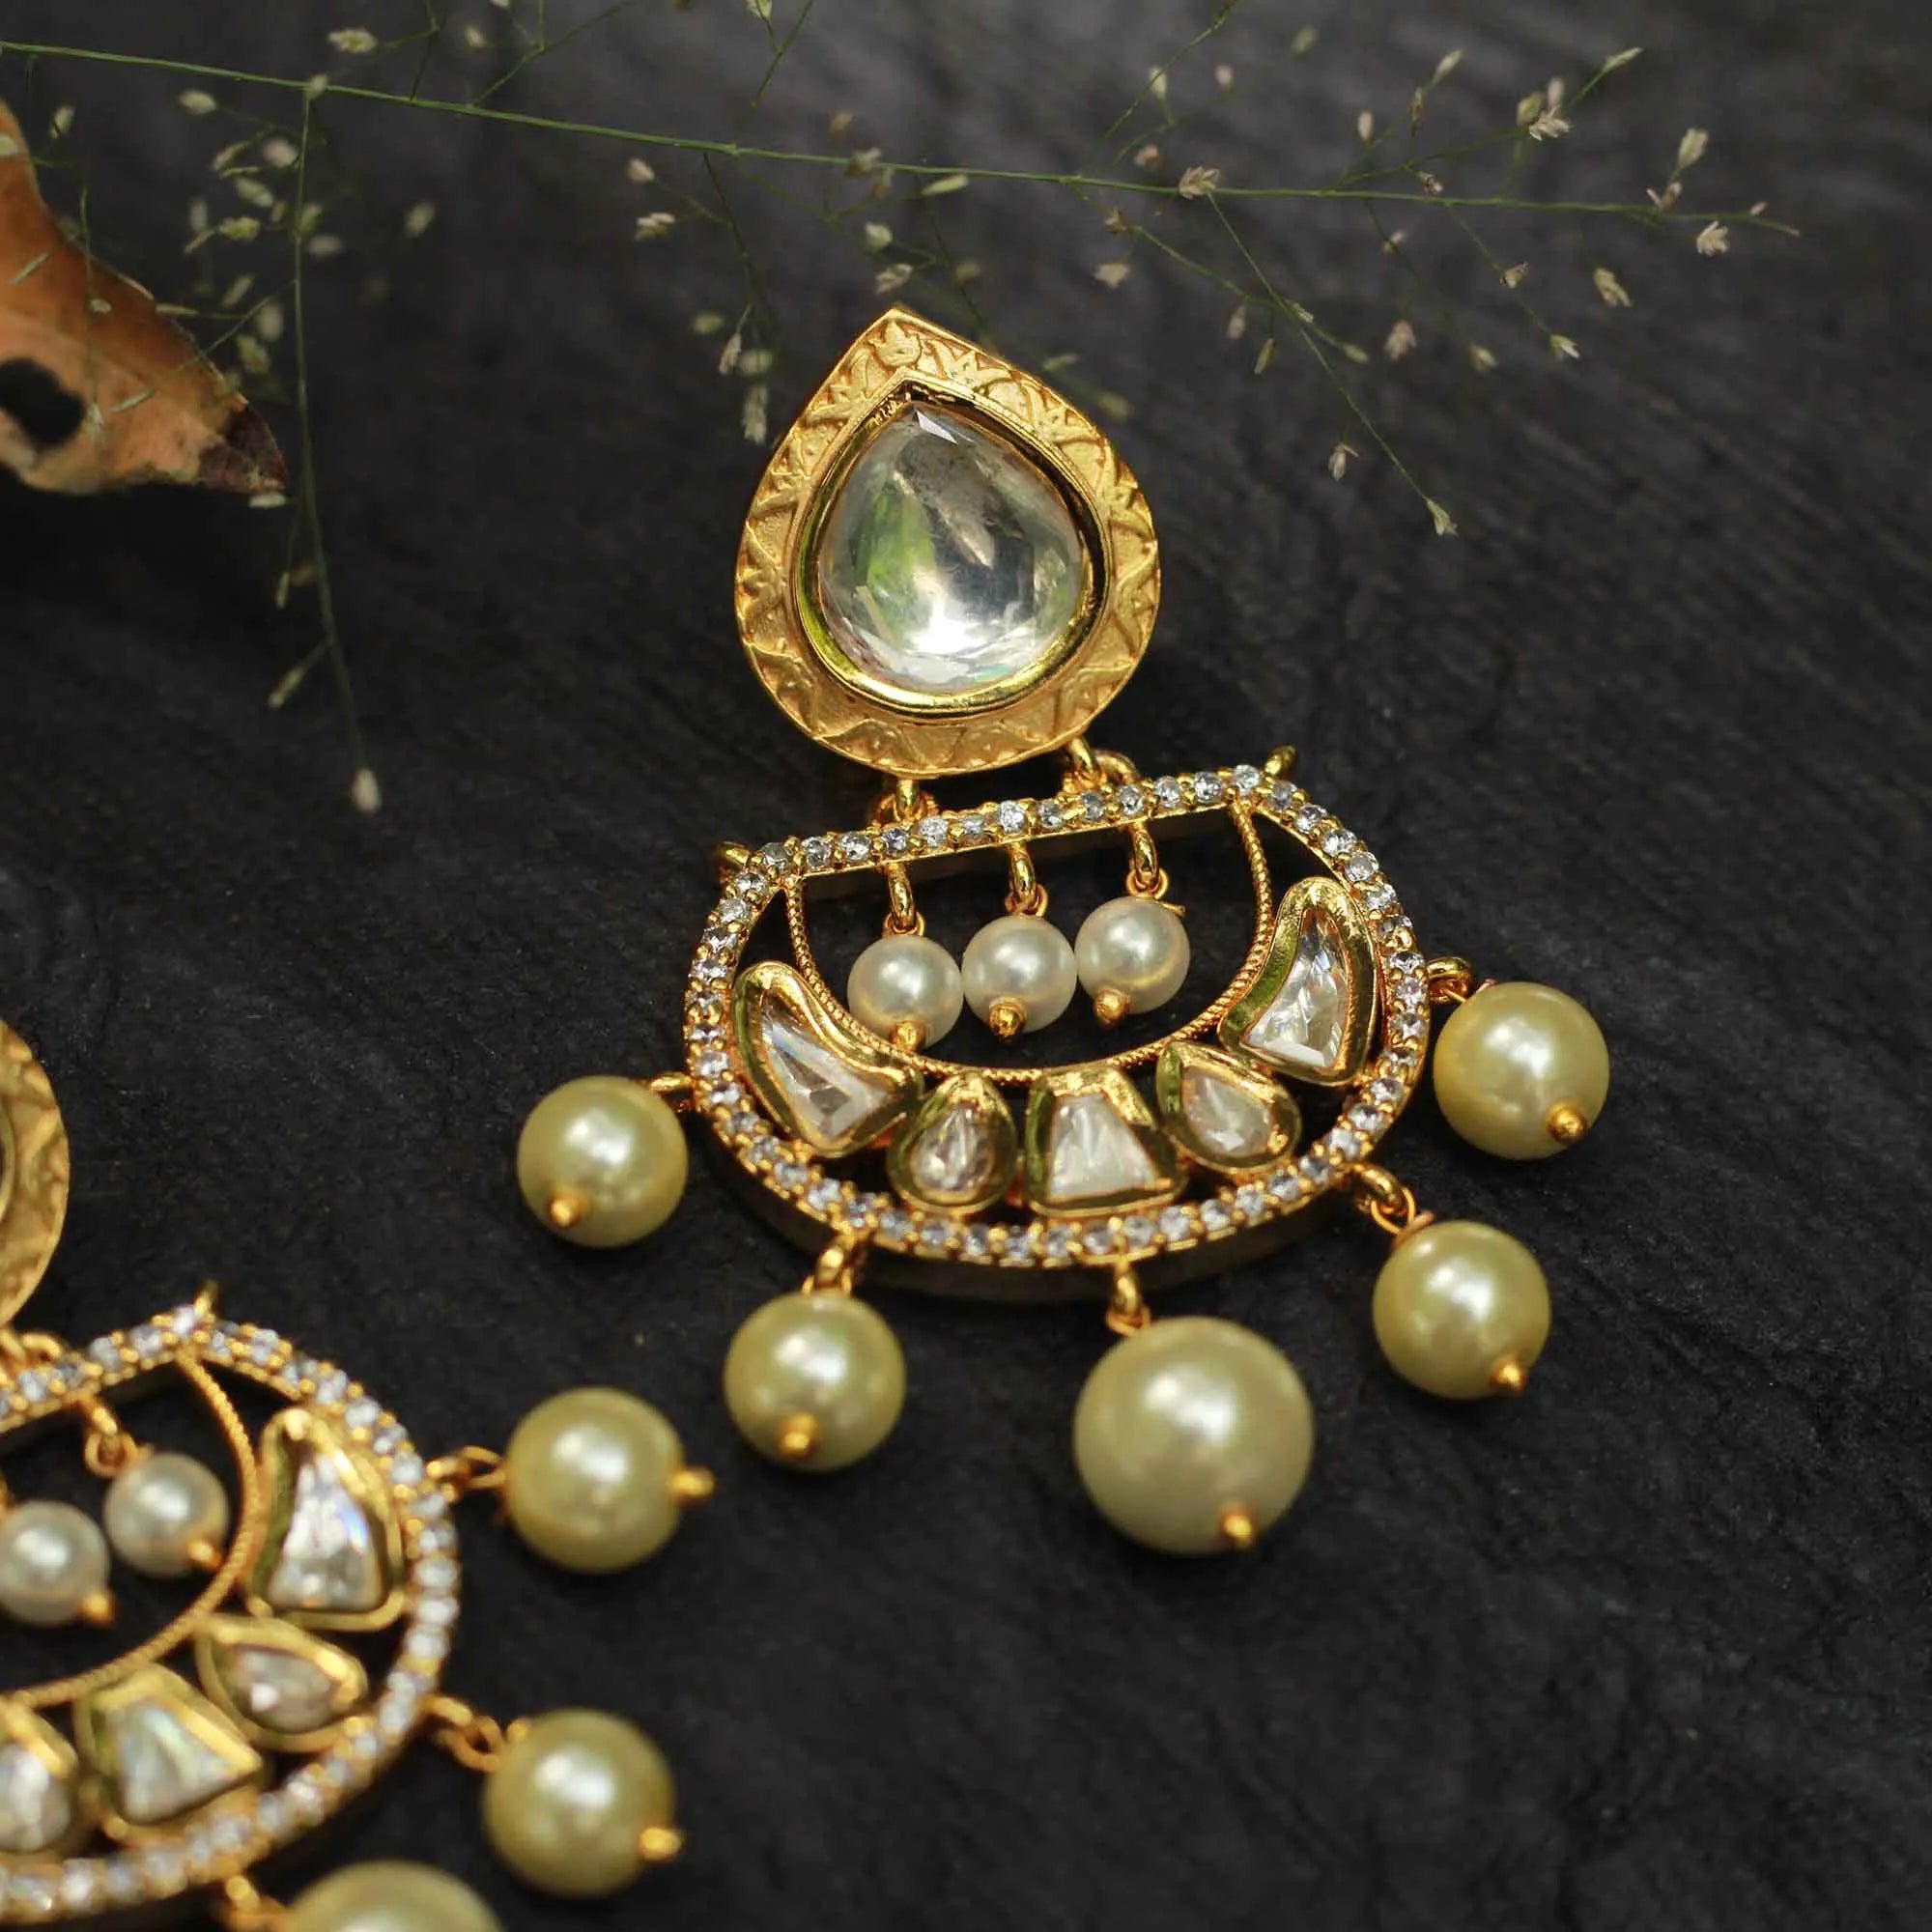 Chandbali Earrings Made With White Stones And Adorned With Pearls